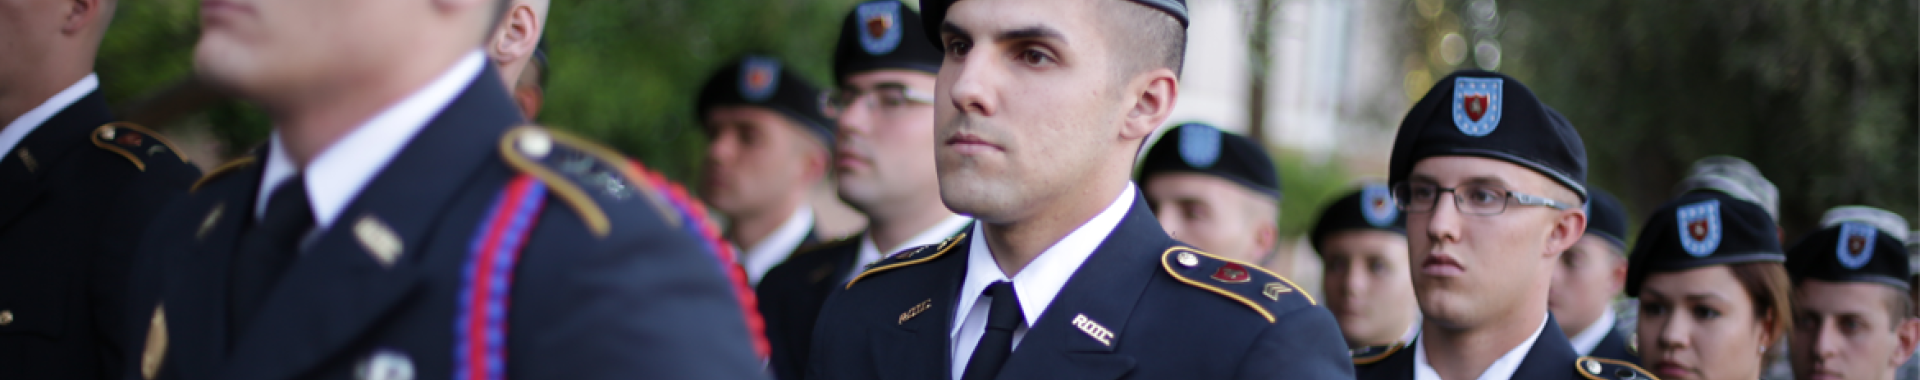 Servicemembers standing in line. 